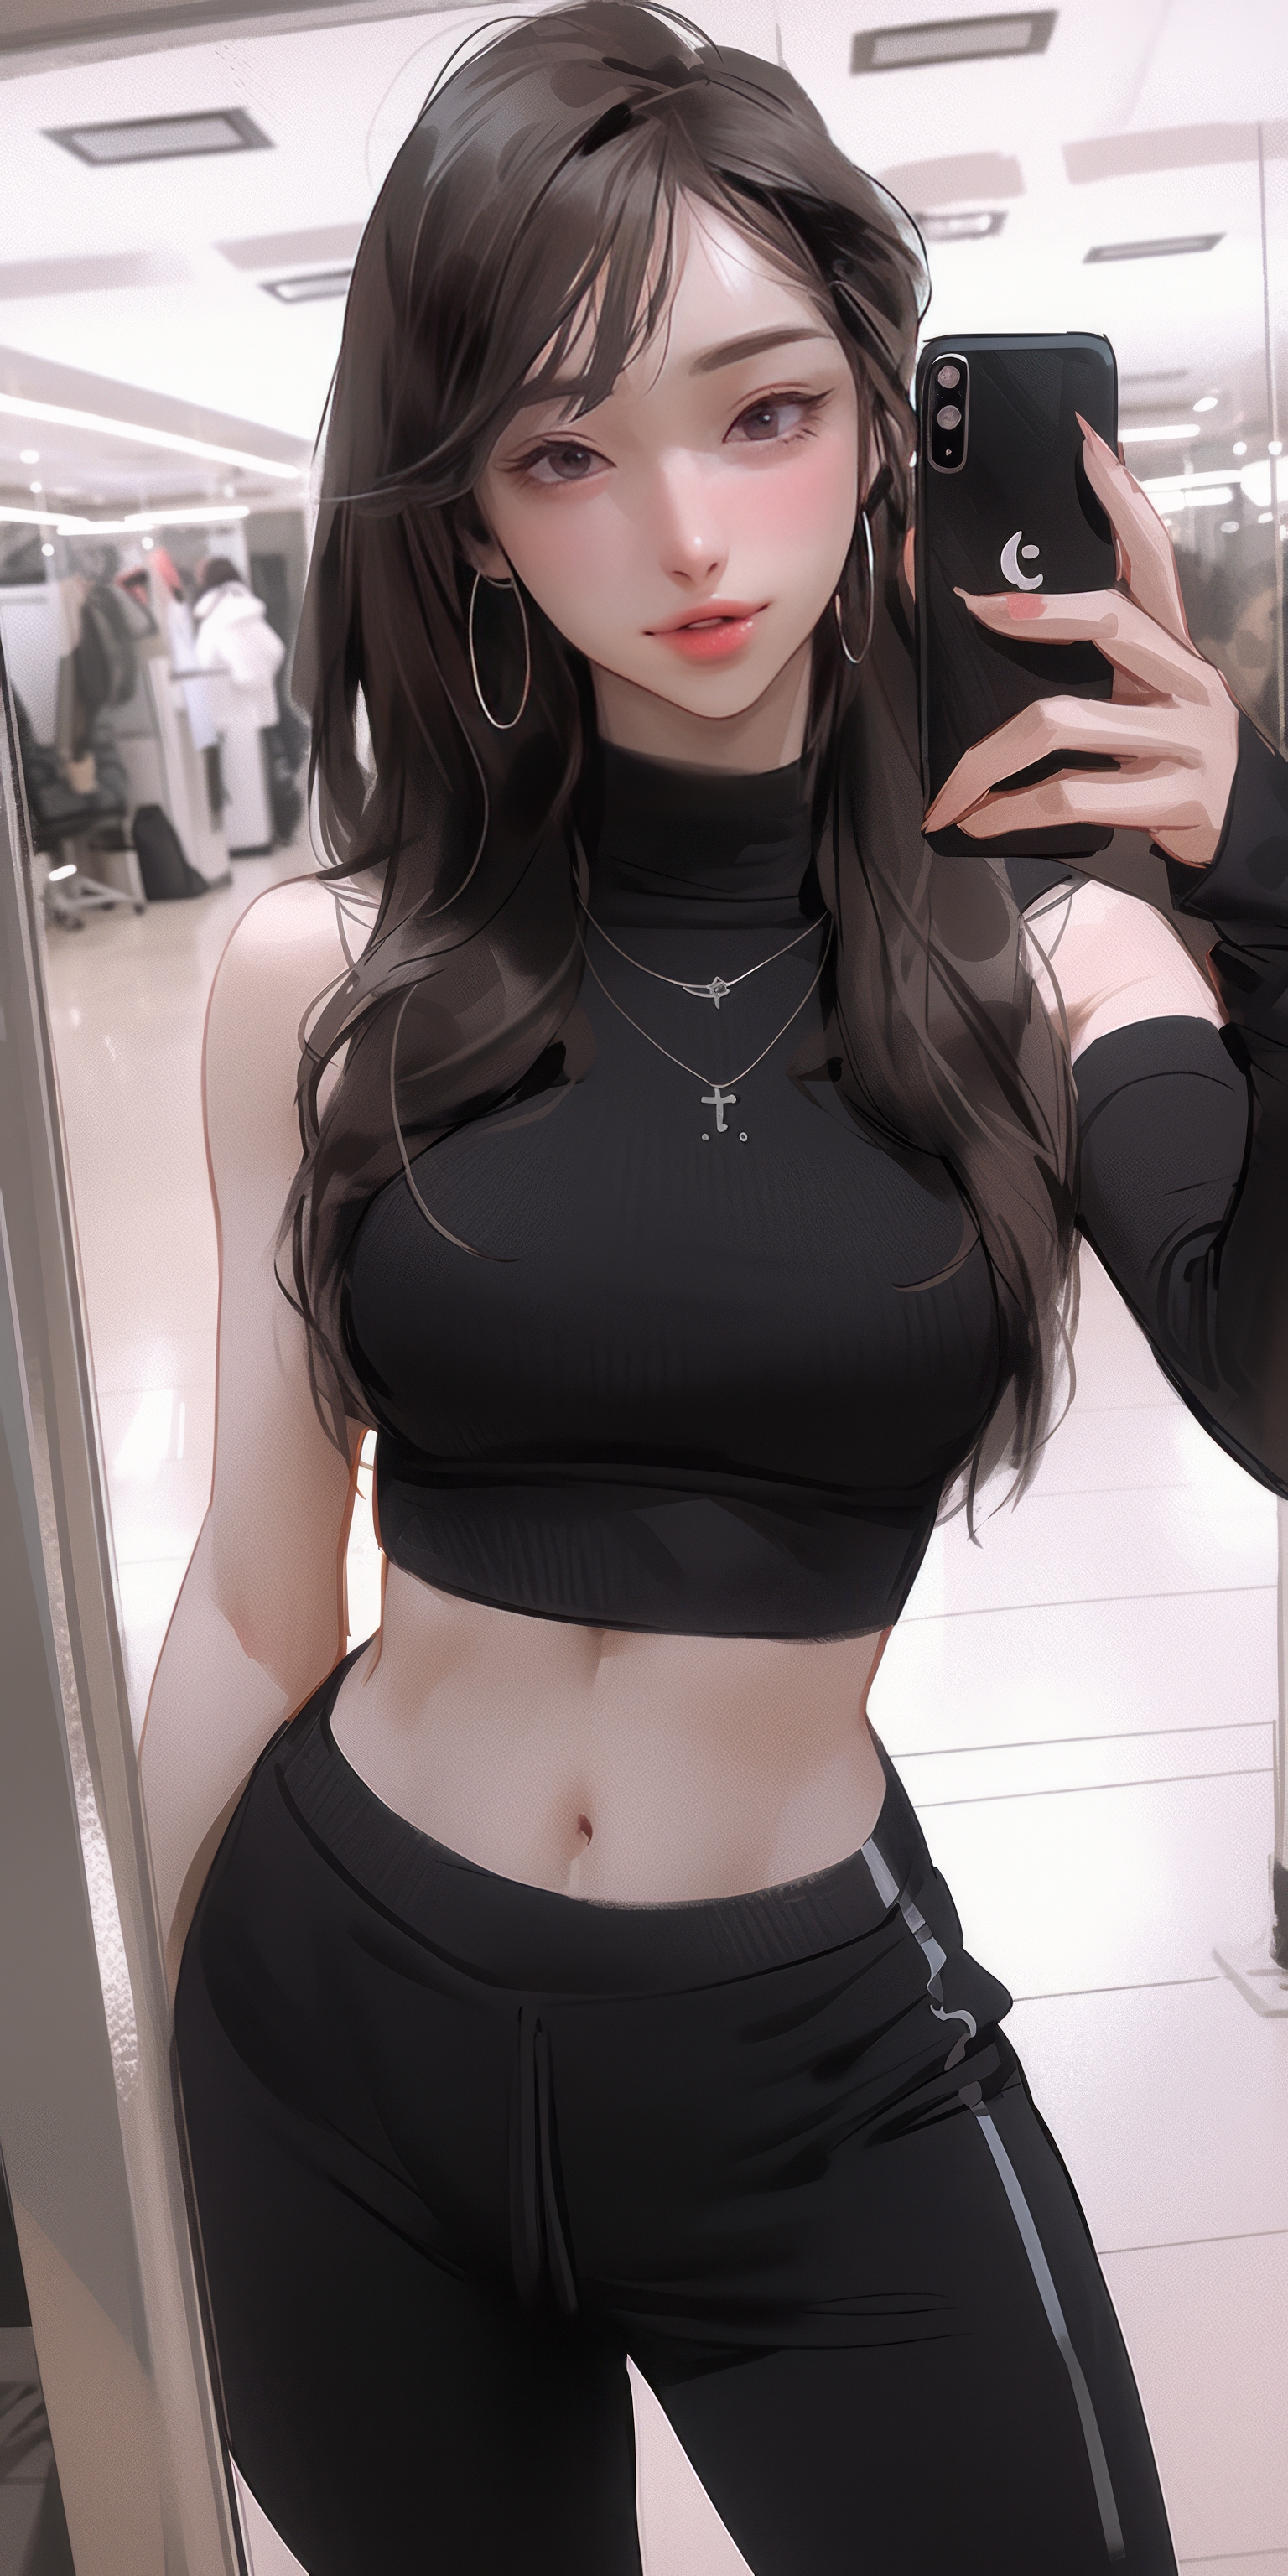 General 1536x3072 AI art women illustration selfies bare midriff sports bra Asian phone portrait display long hair earring hoop earrings looking at viewer belly belly button necklace